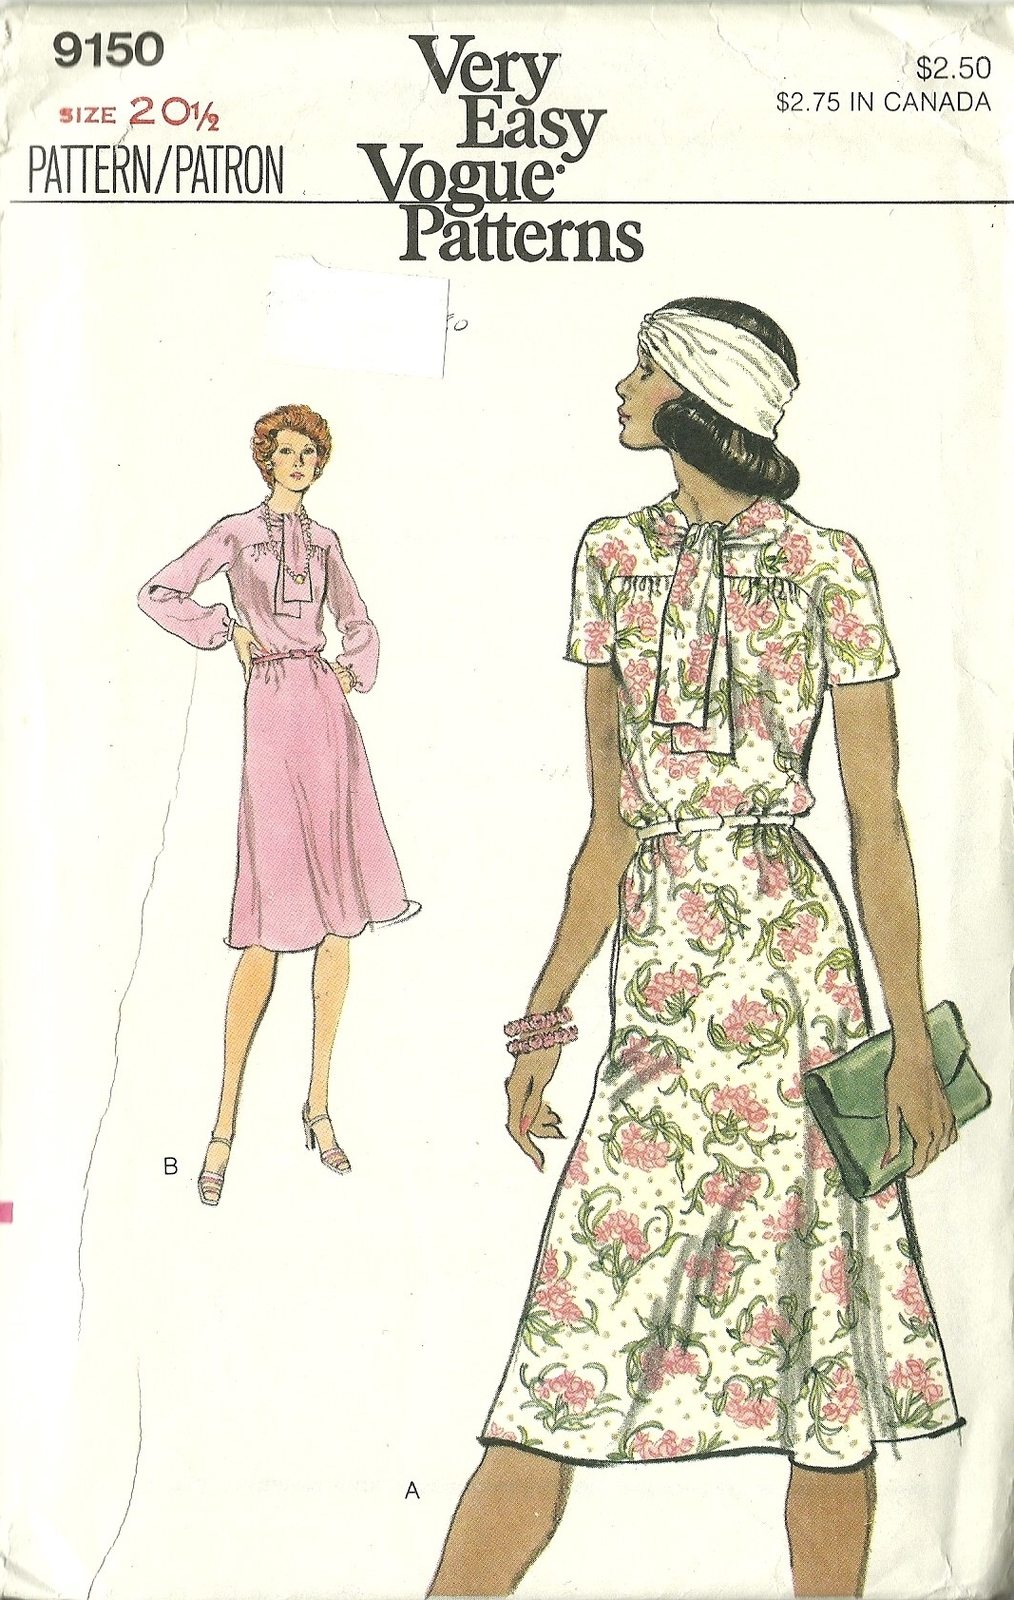 Primary image for Vogue Sewing Pattern 9150 Misses Womens Dress Size 20.5 New Uncut